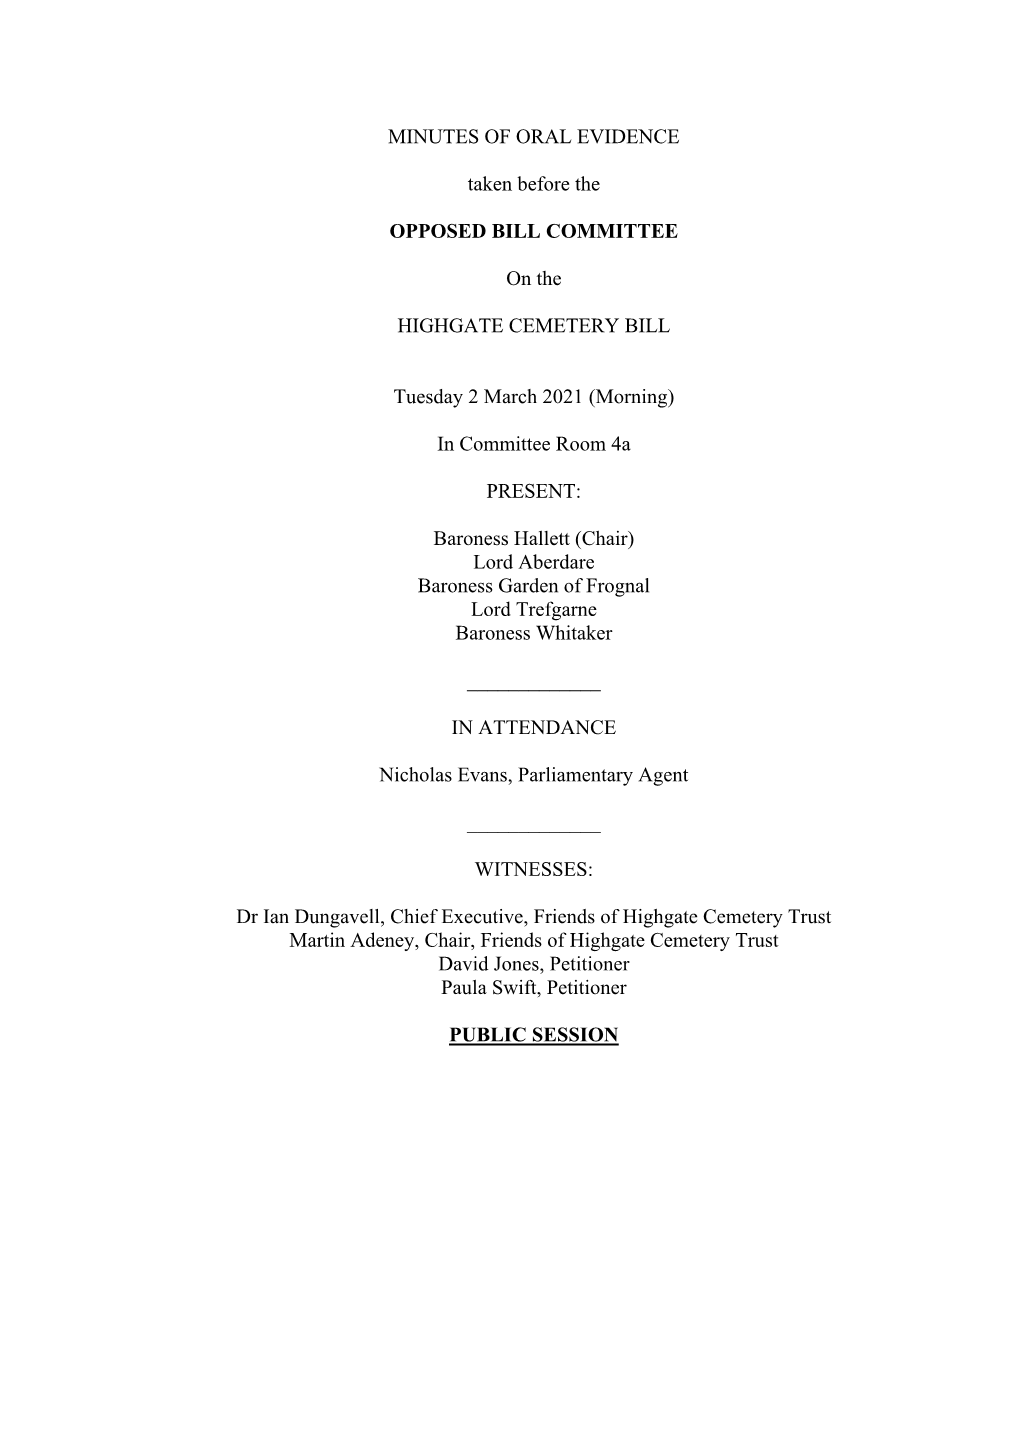 MINUTES of ORAL EVIDENCE Taken Before the OPPOSED BILL COMMITTEE on the HIGHGATE CEMETERY BILL Tuesday 2 March 2021 (Morning) In